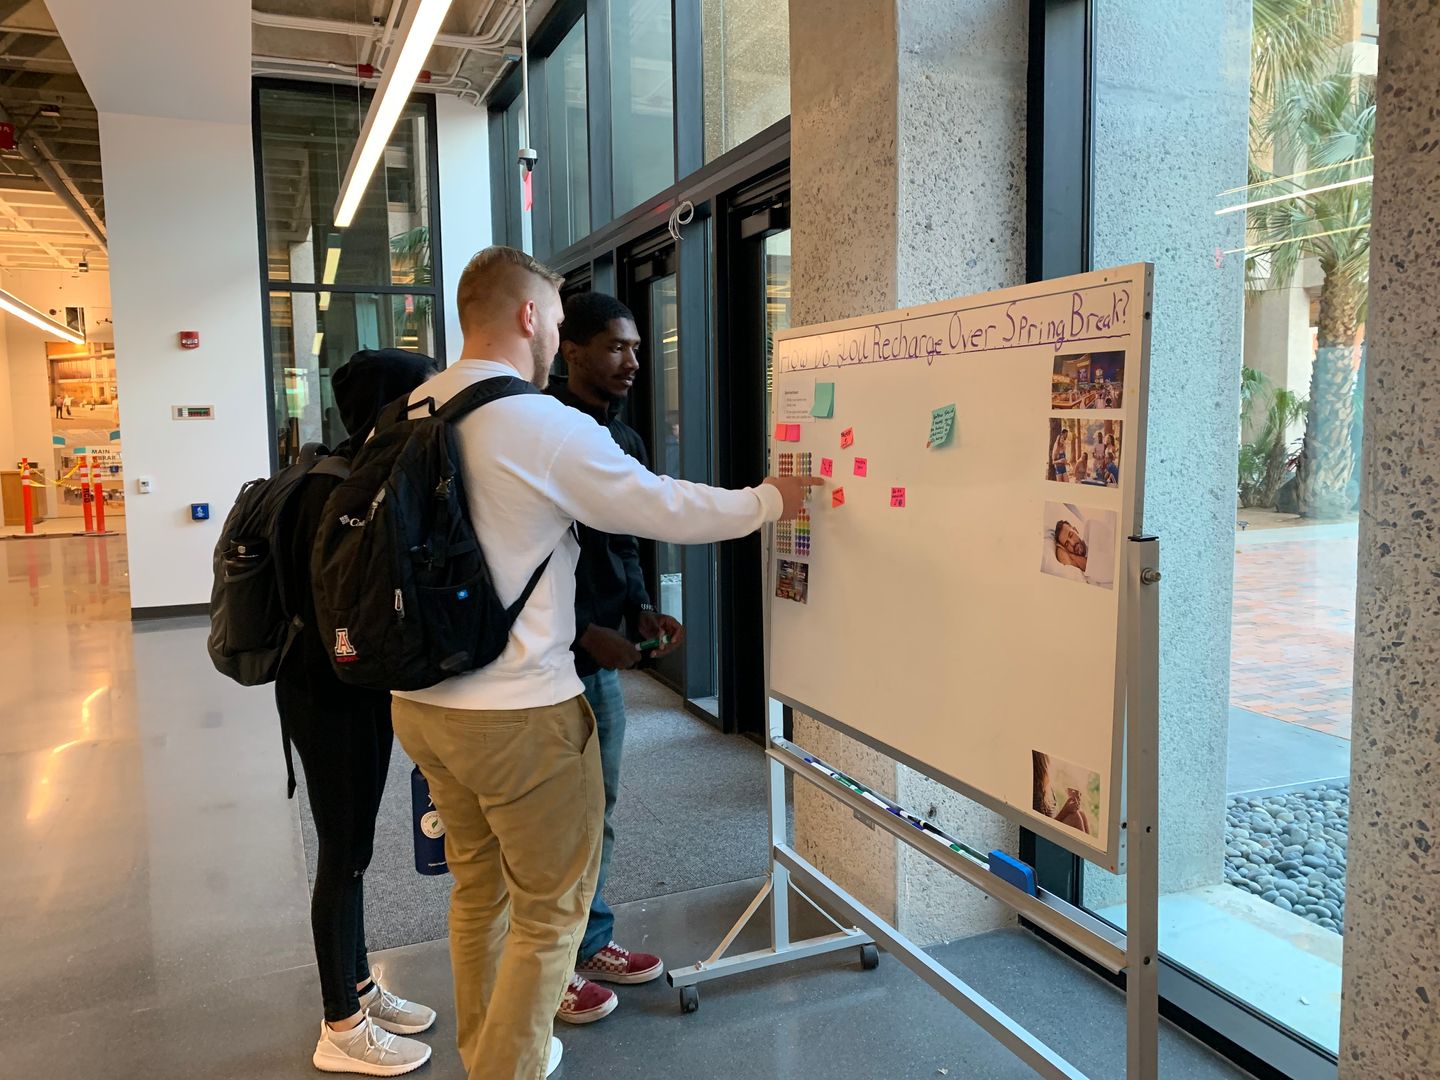 Three students pointing at sticky notes on a whiteboard at the entrance to a public space